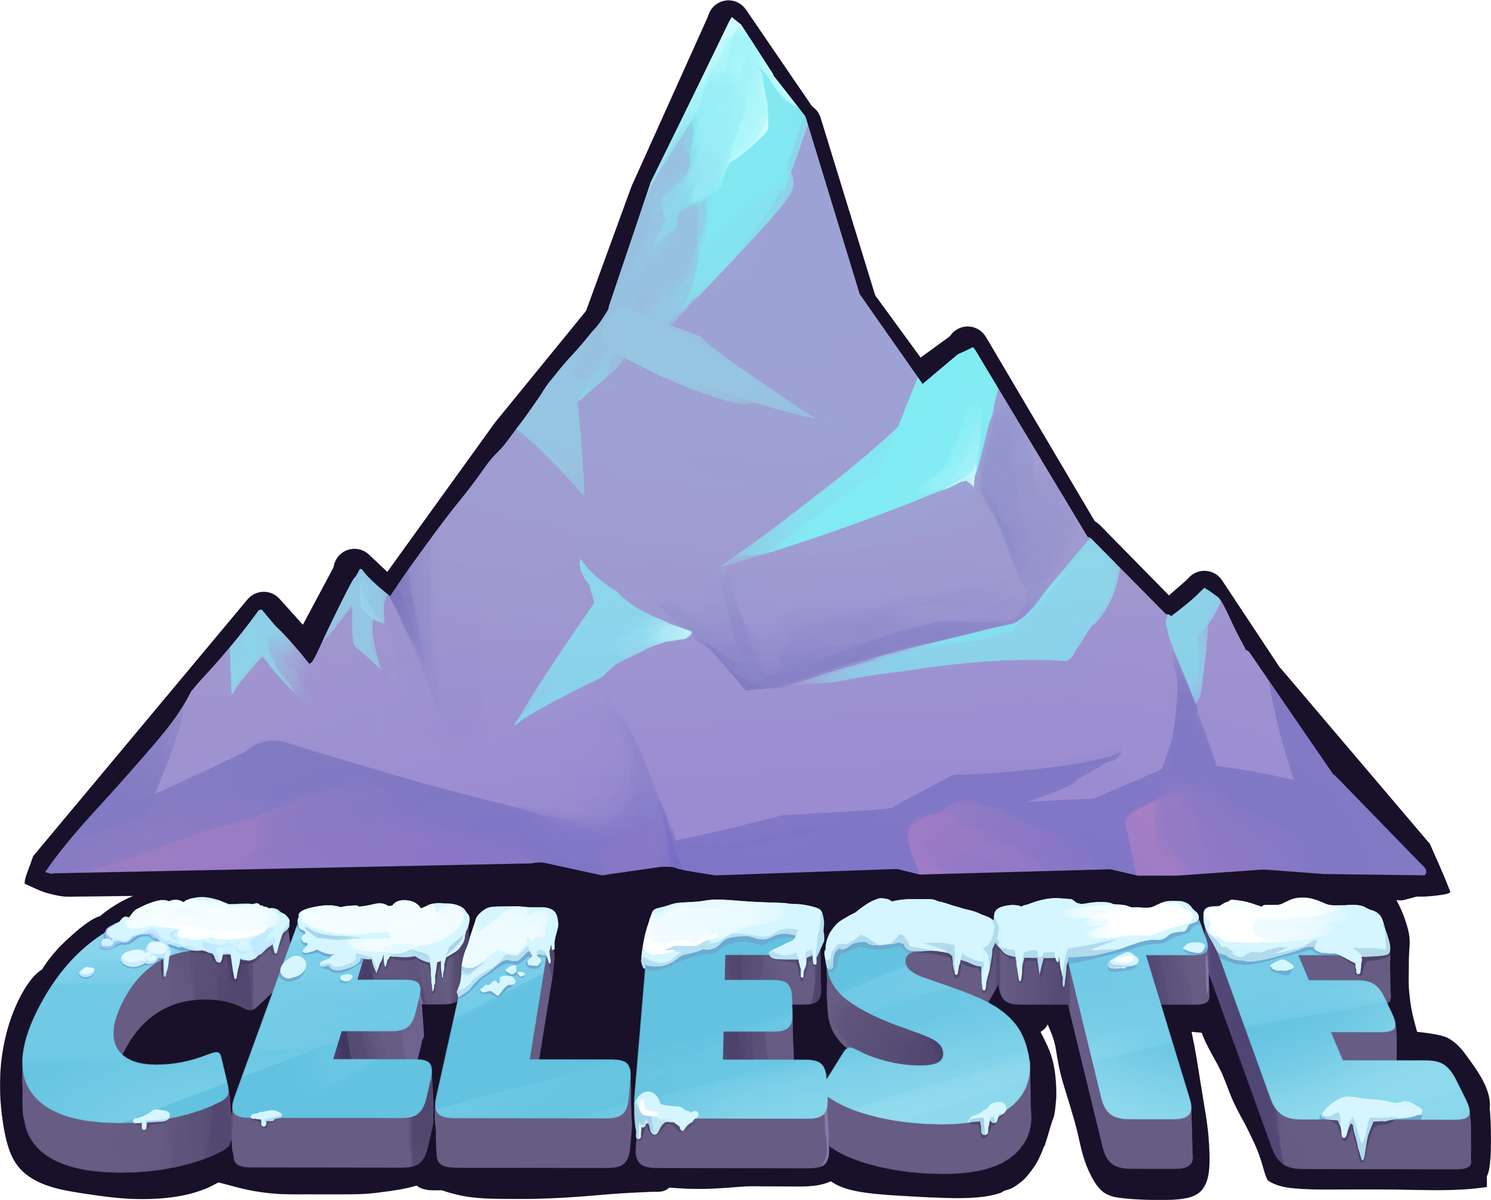 Celeste h puzzle online from photo